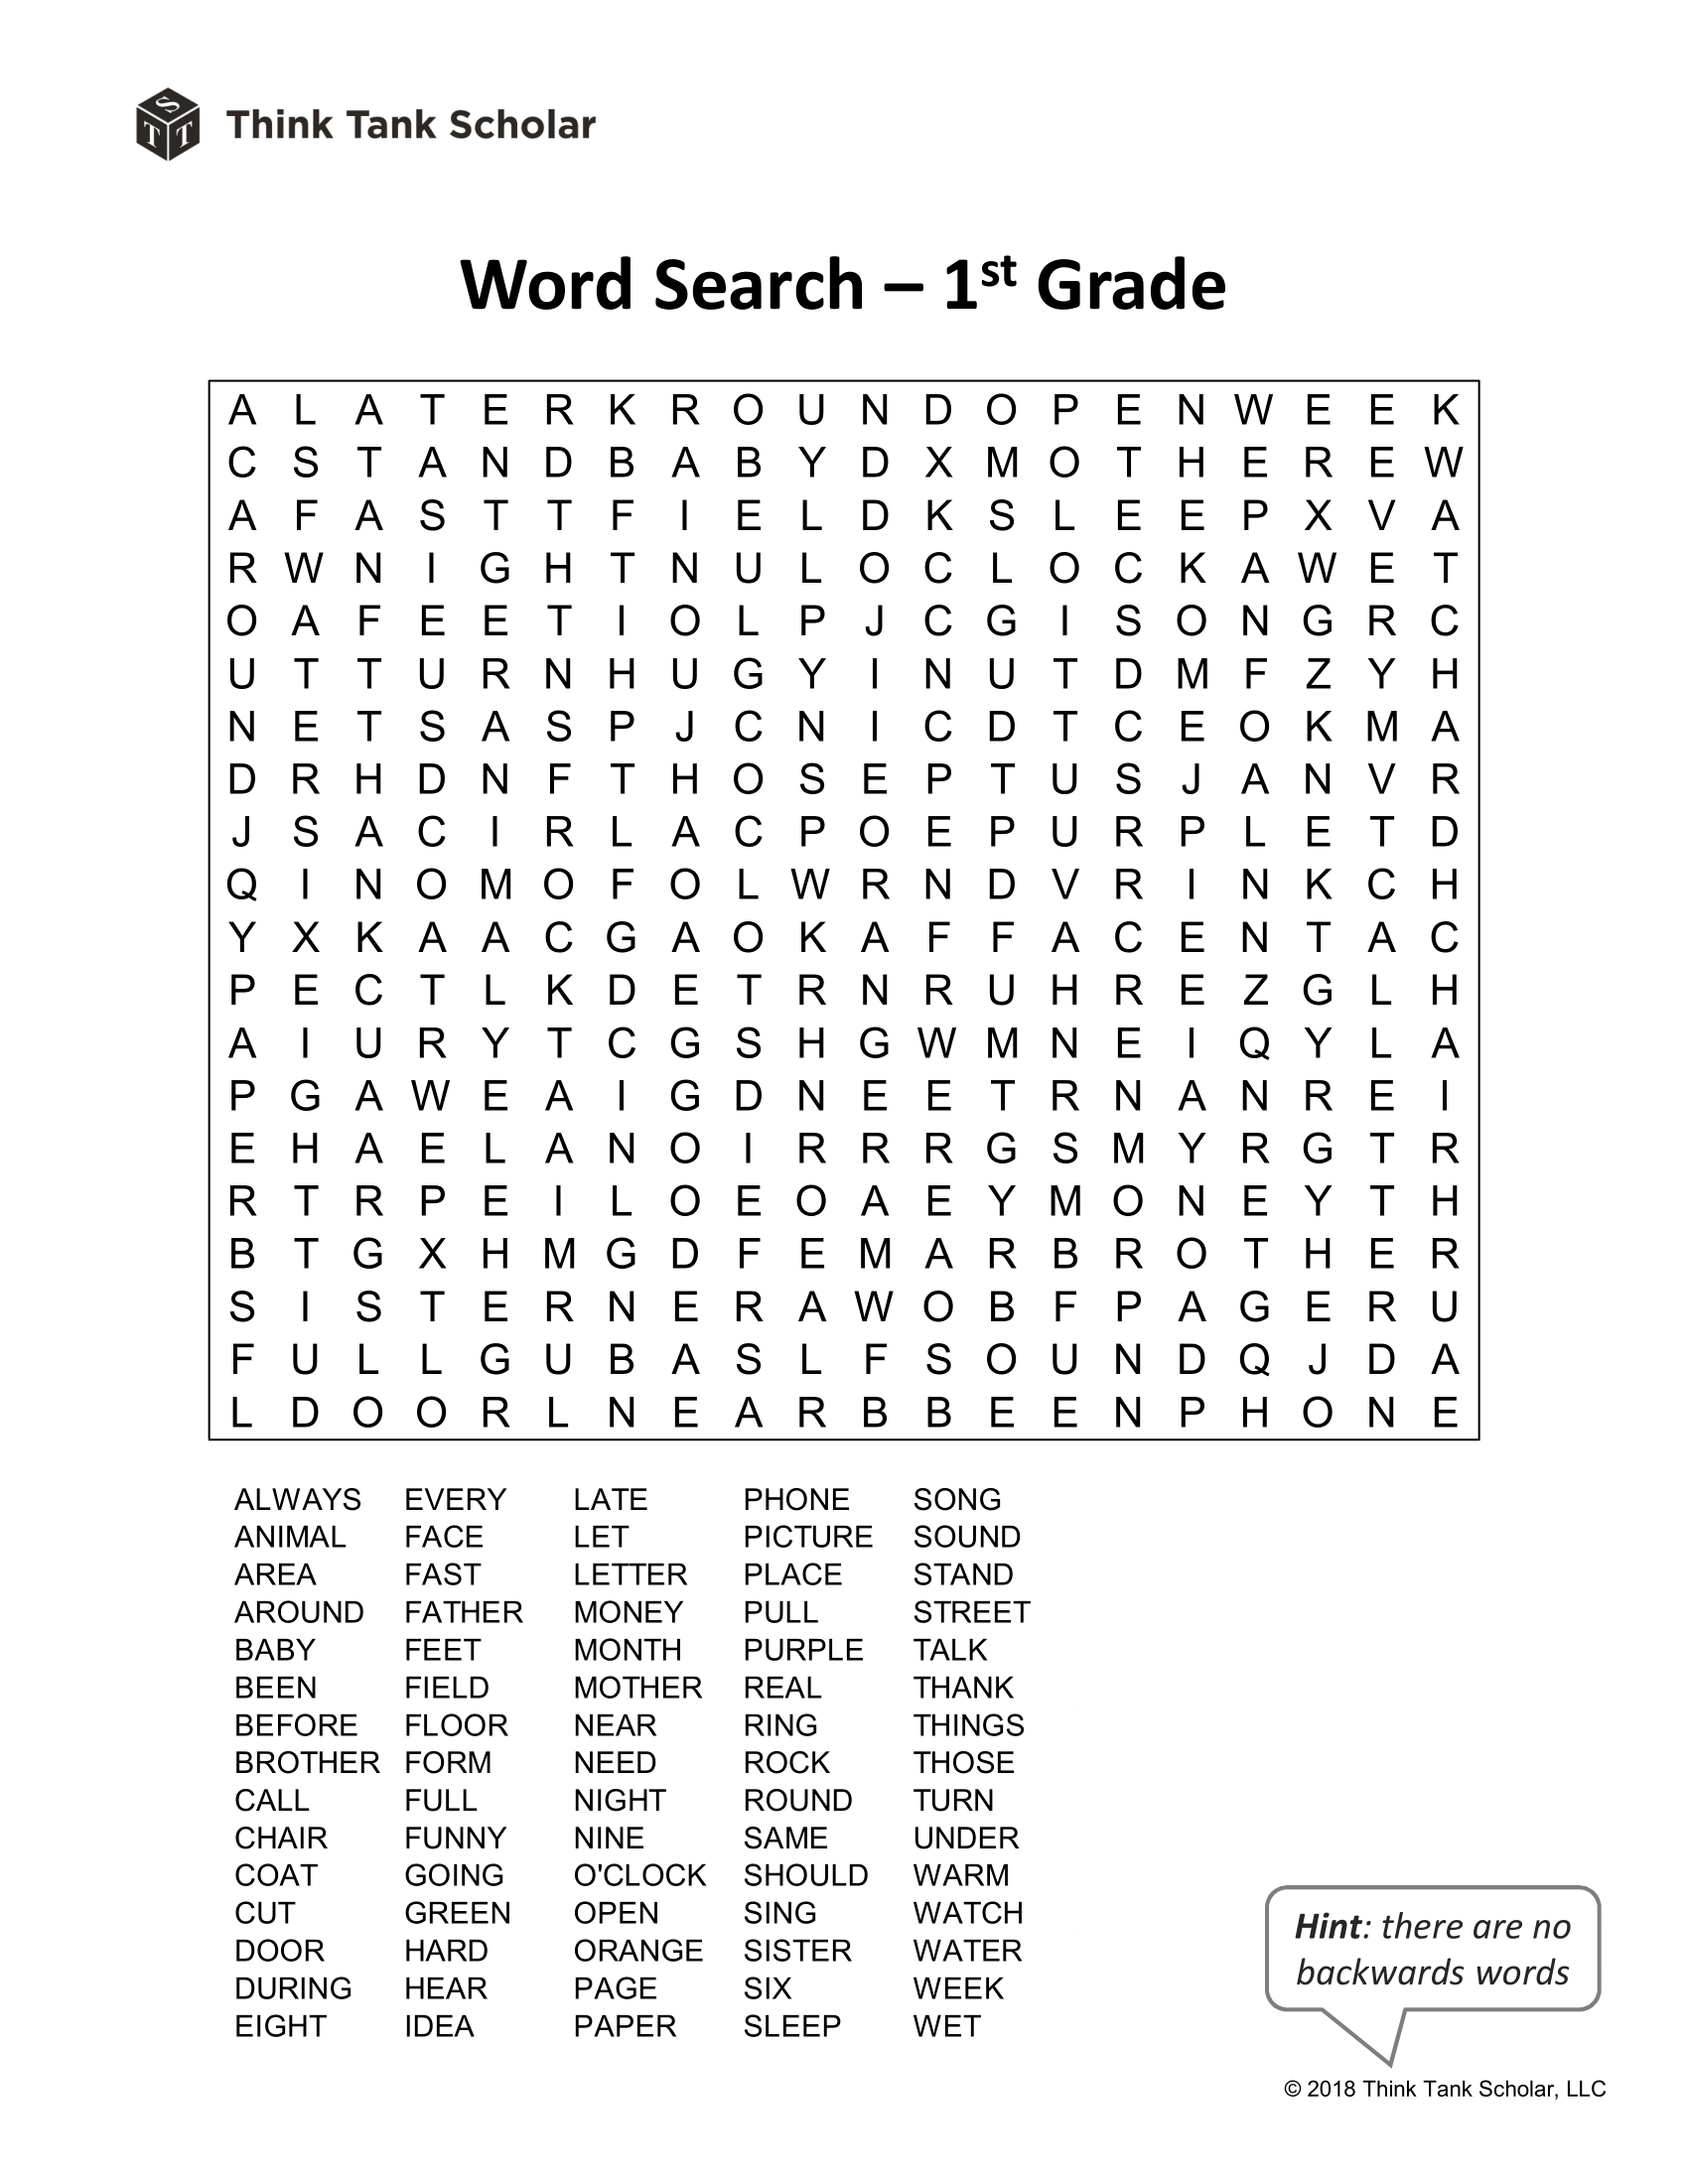 Sight Words Worksheet Free Word Search 1st Grade Printable Think